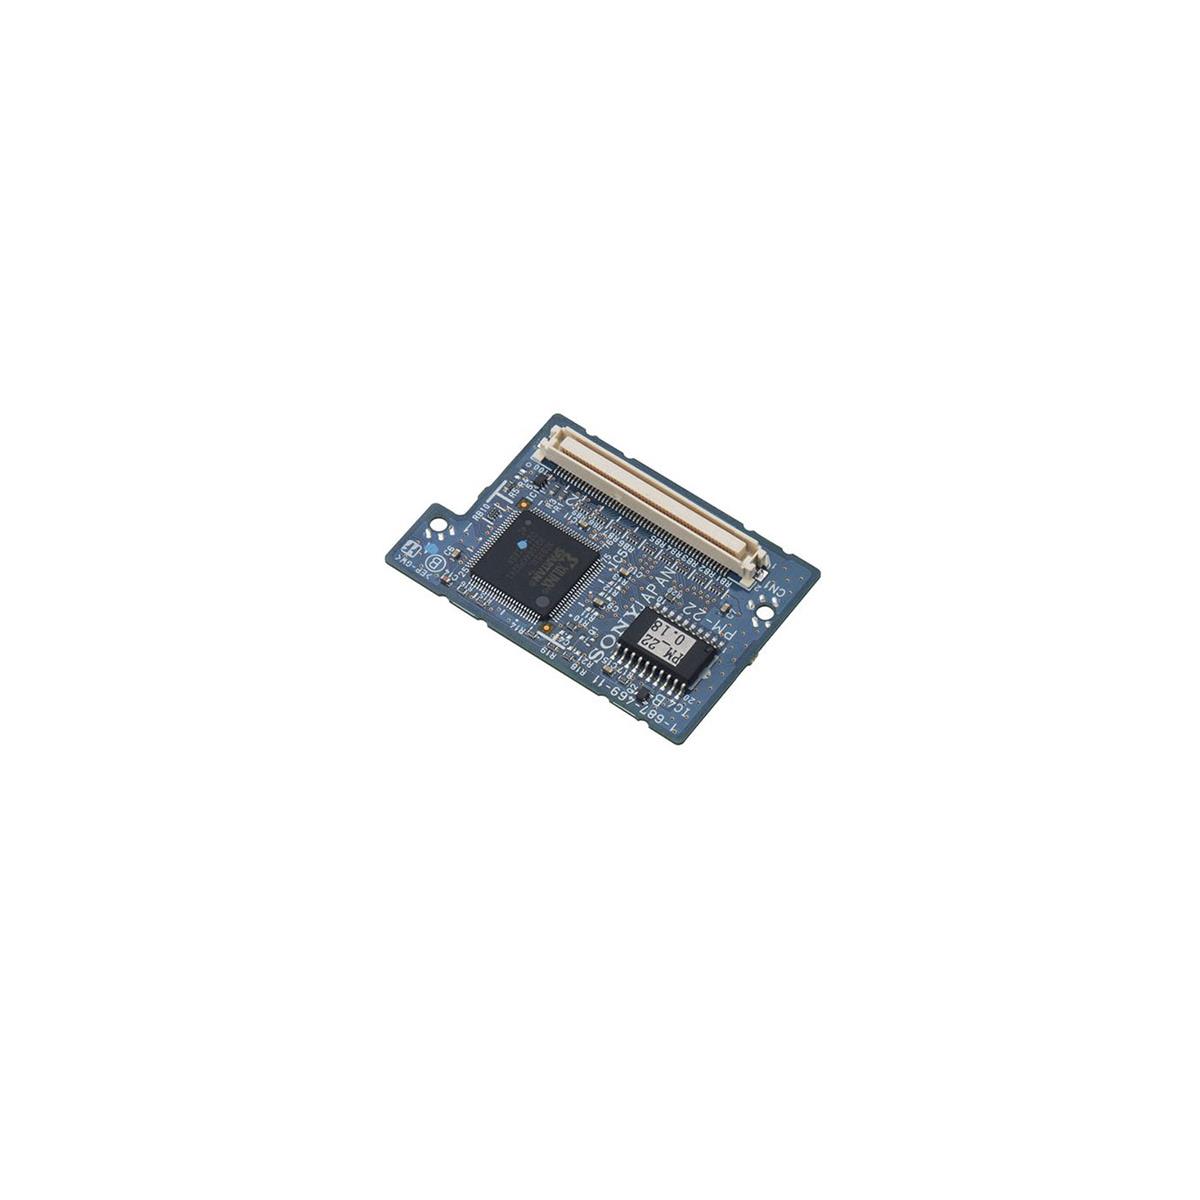 Image of Sony Slow Shutter Board for HDW730S